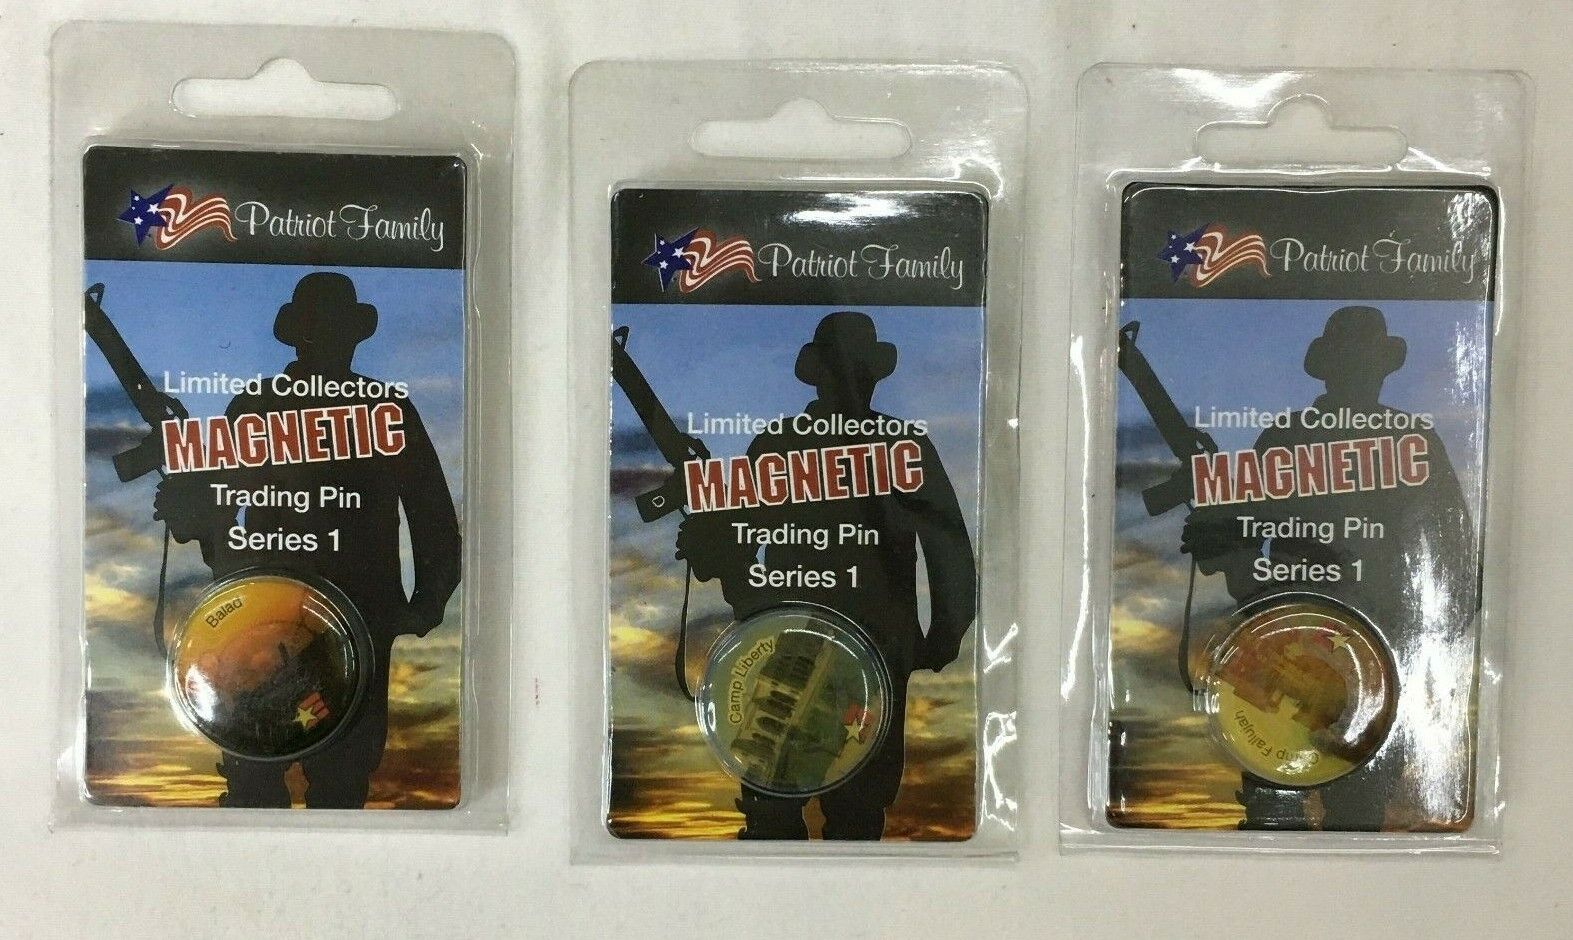 Magnetic Trading Pin, Patriot Family Limited Collectors Iraq, 3 Pin Lot Series 1 Без бренда